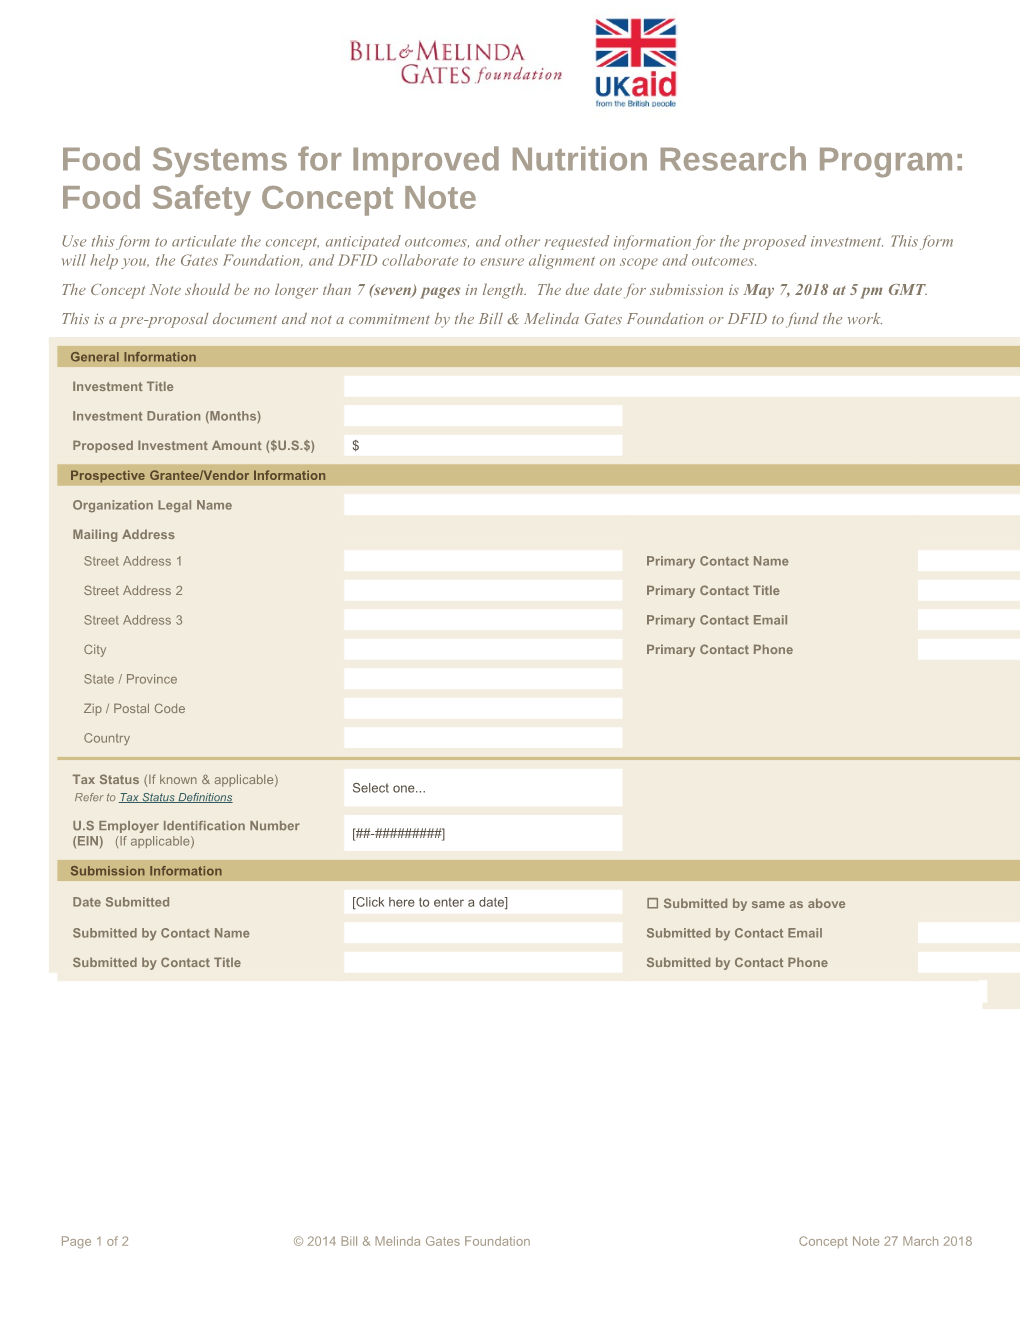 Food Systems for Improved Nutrition Research Program: Food Safety Concept Note